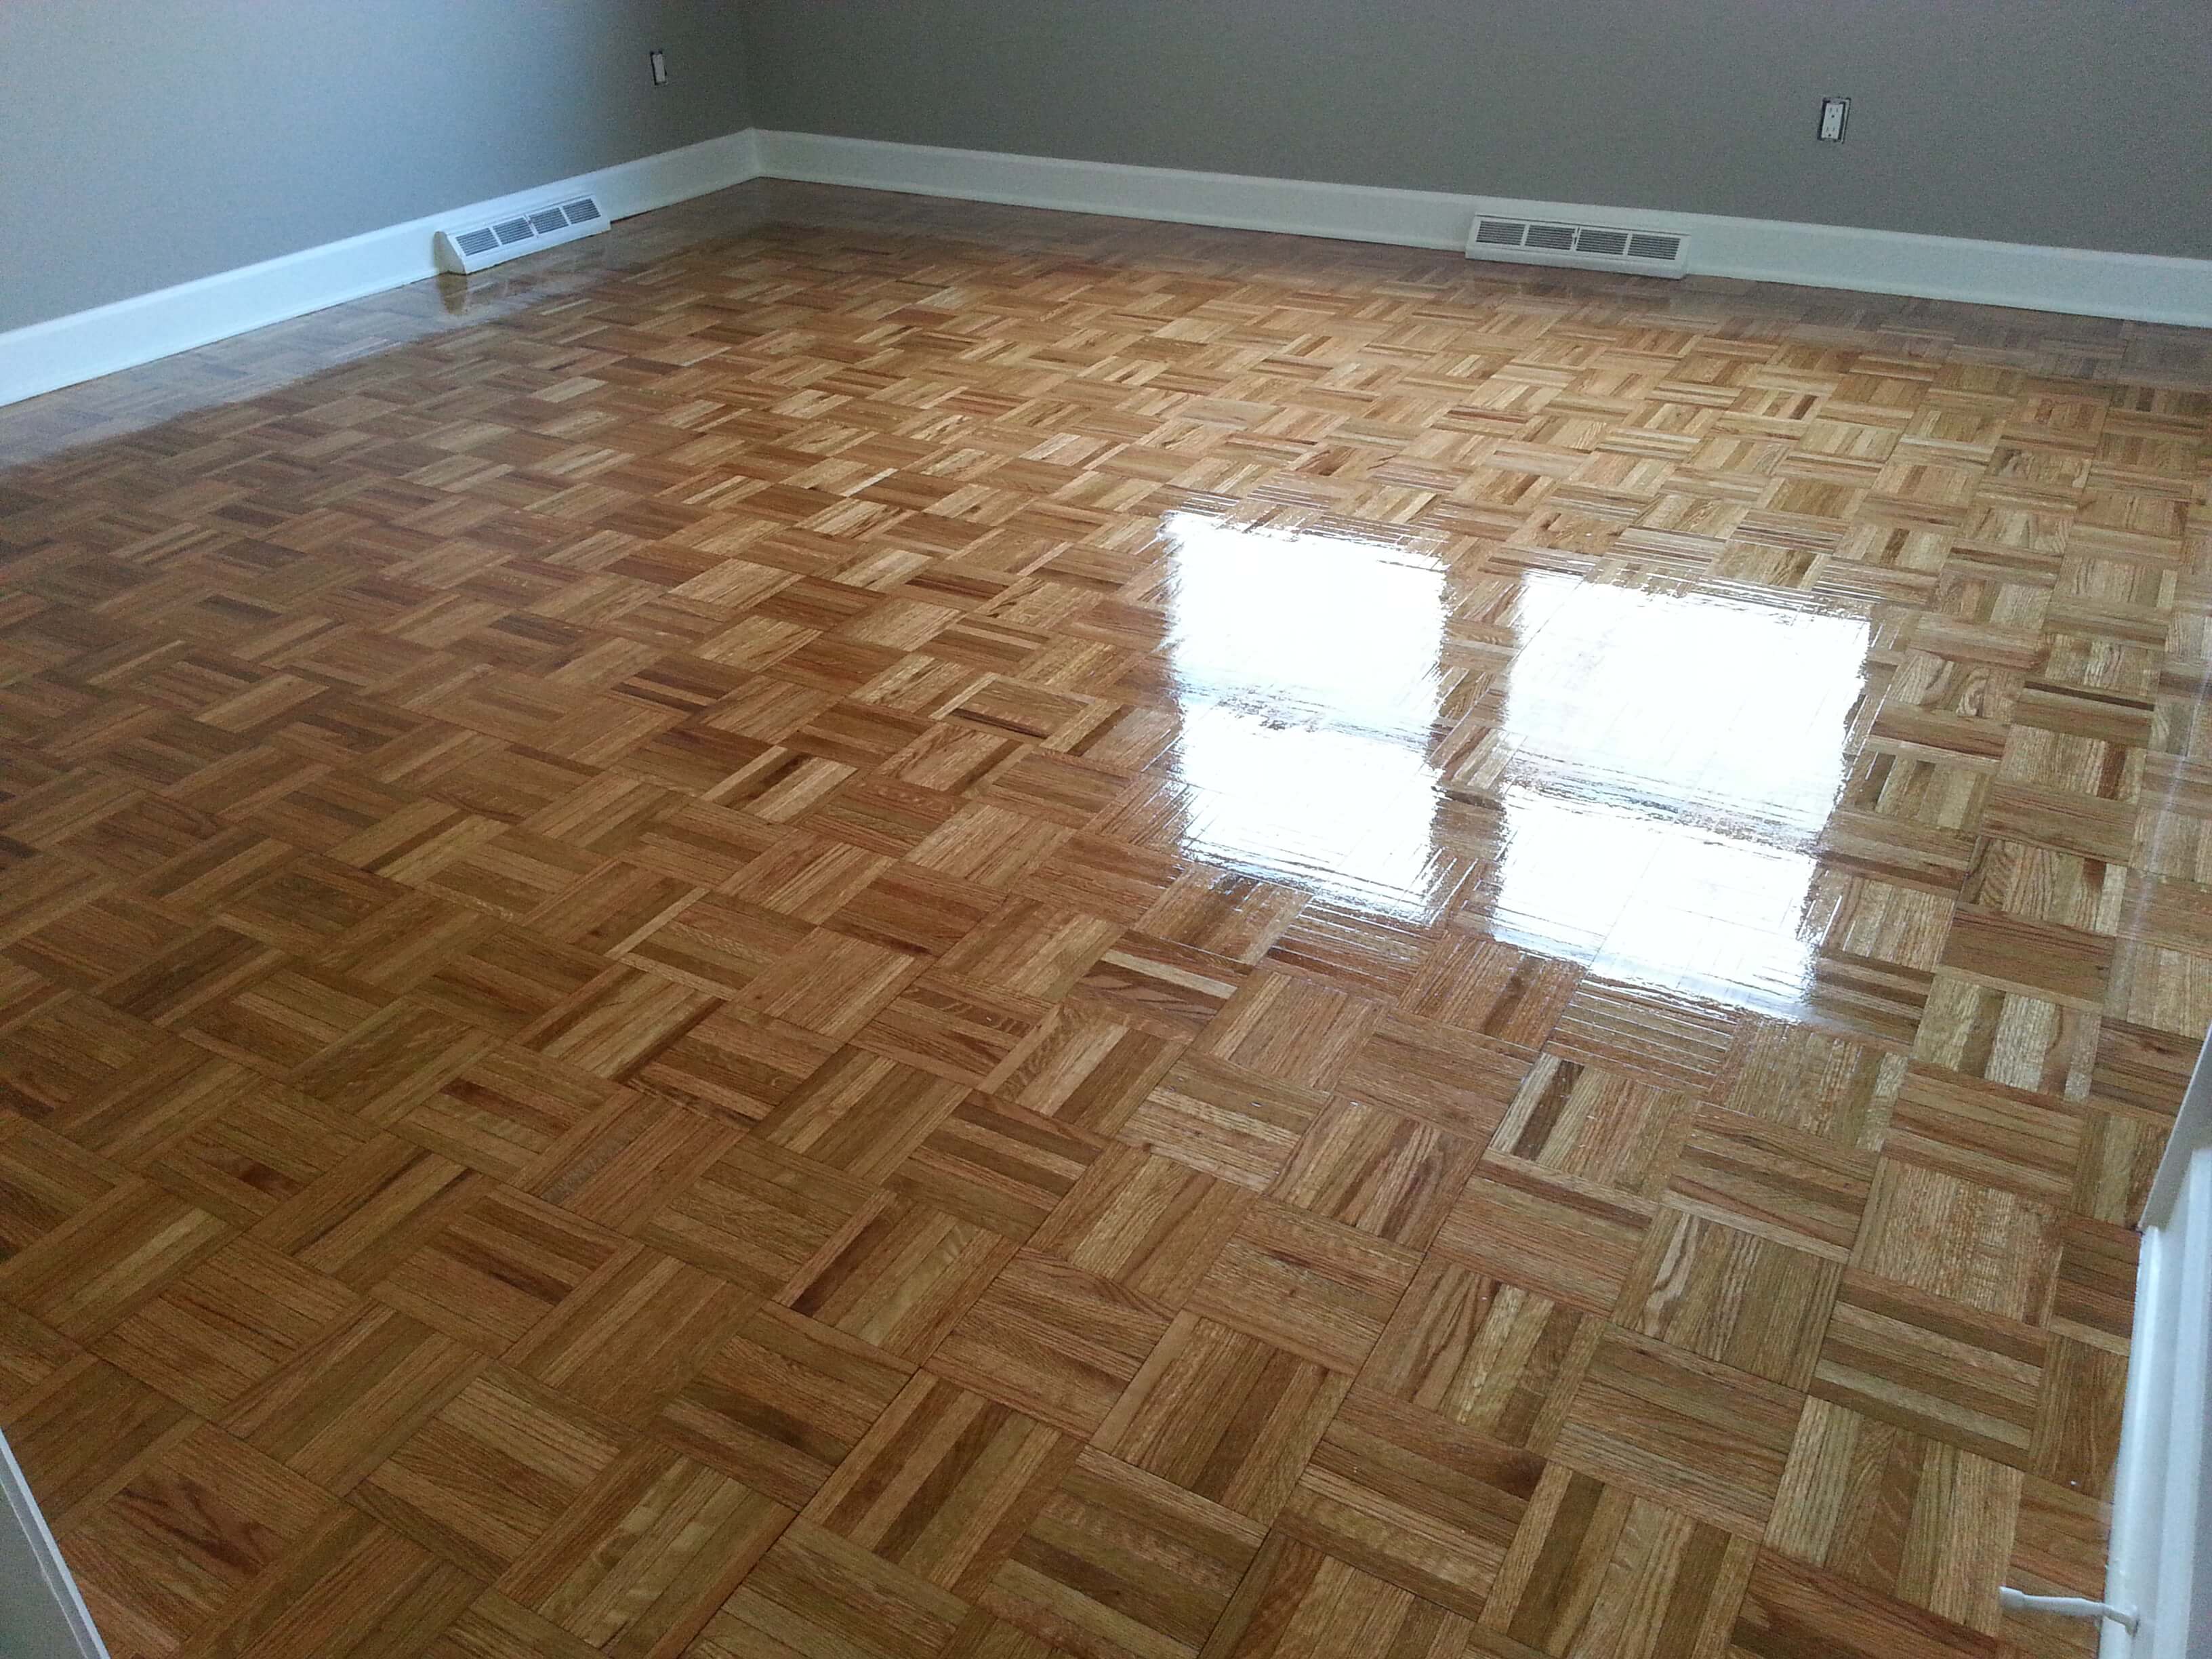 A recently refinished parquet hardwood floor